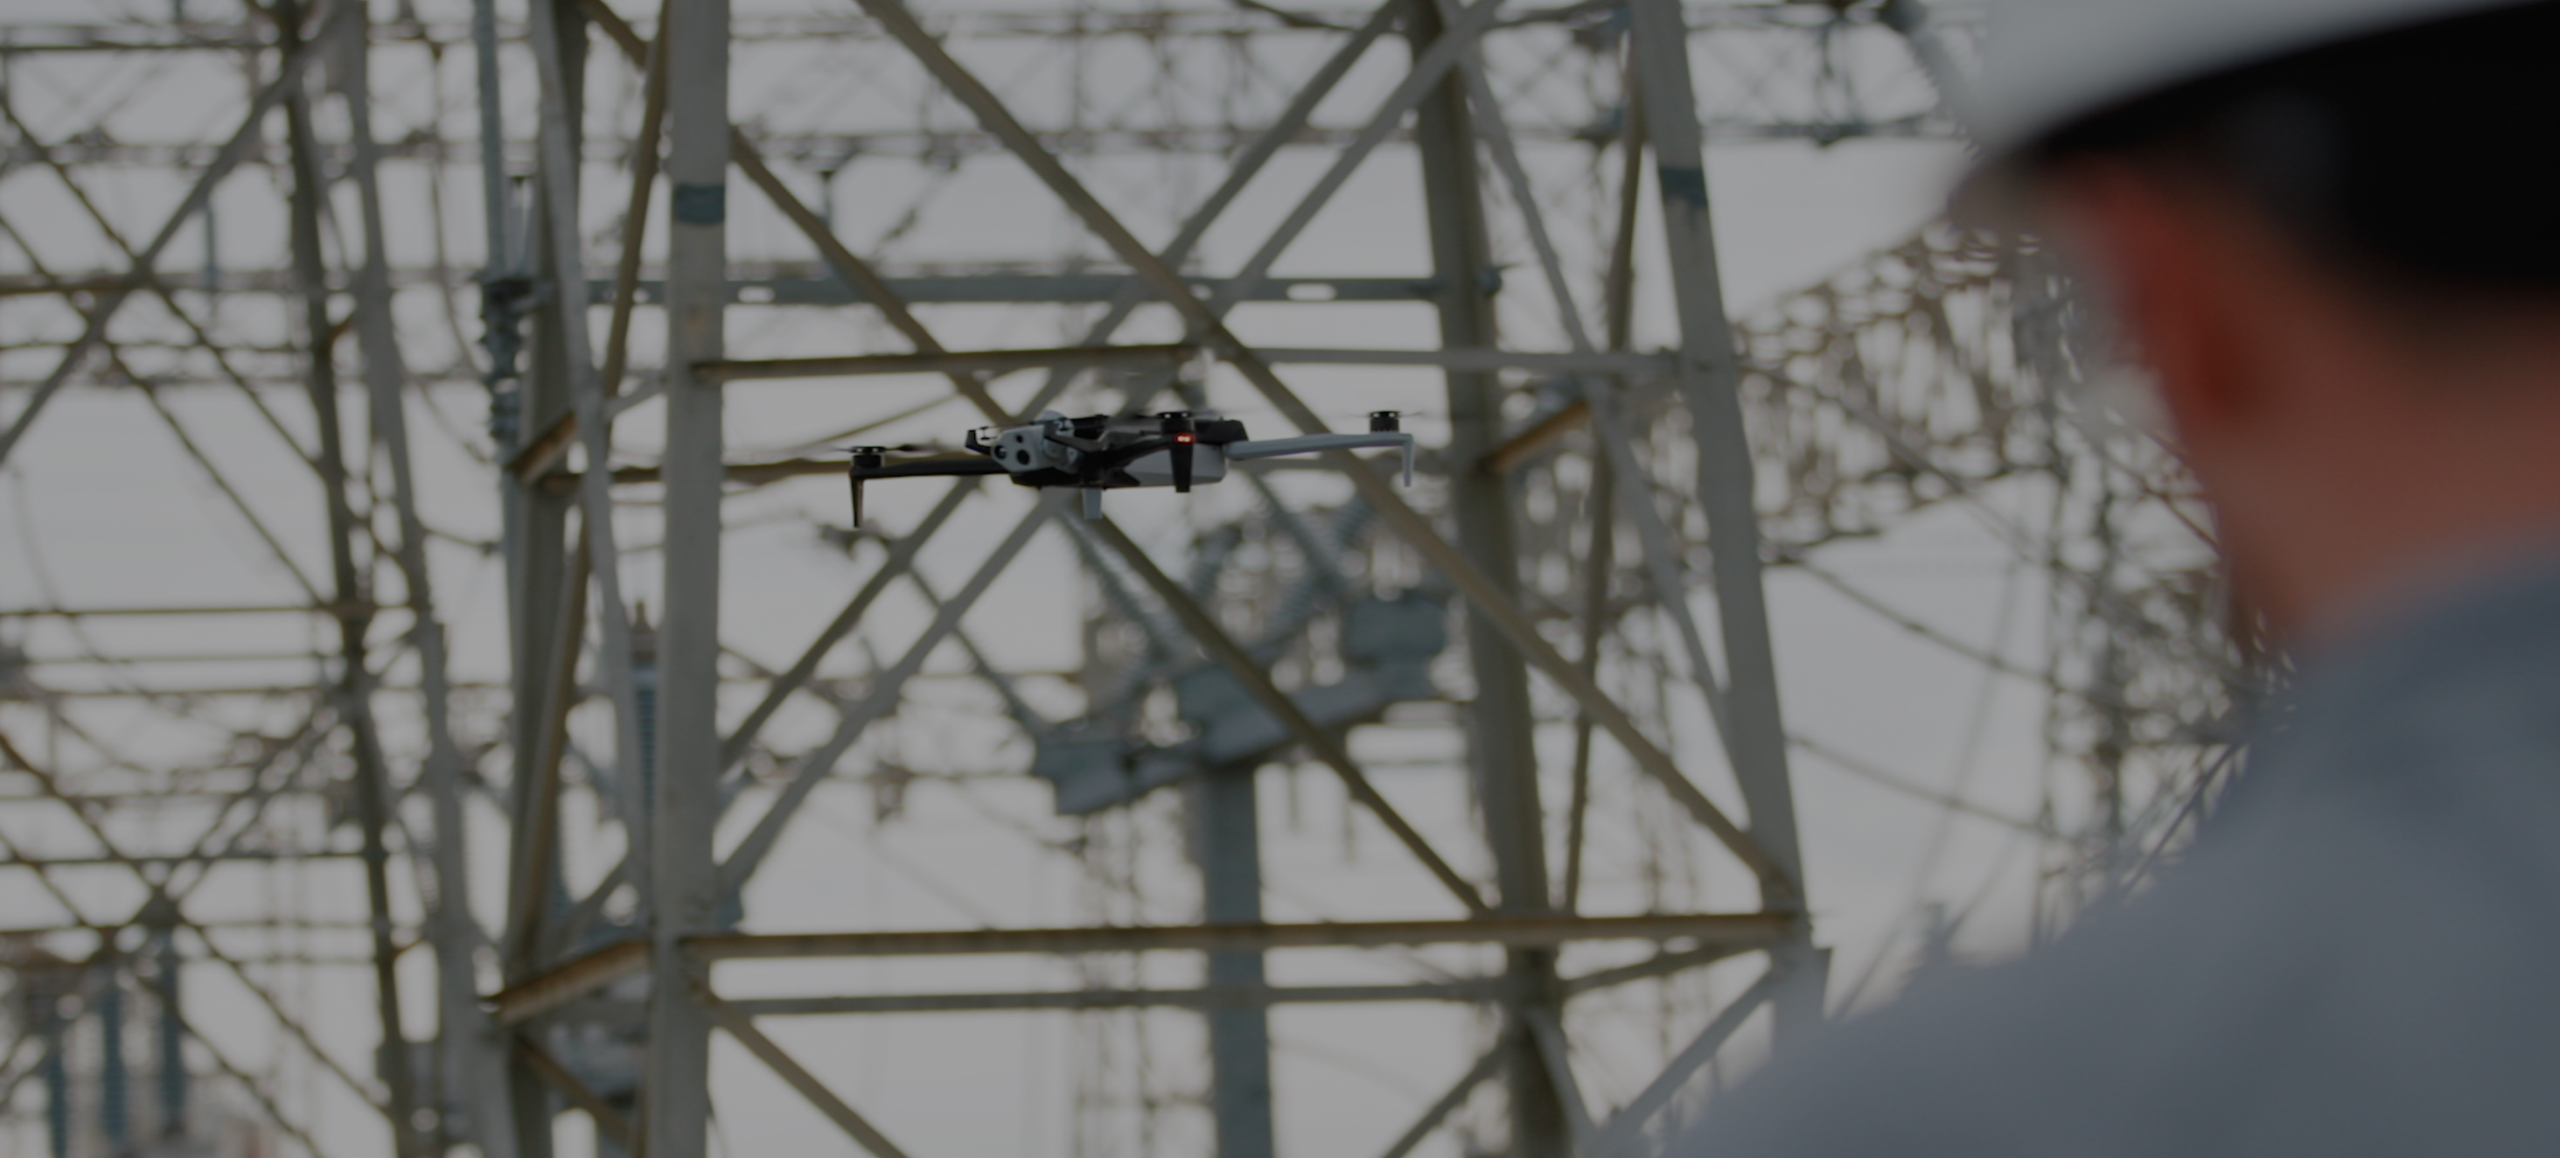 AEP worker using Skydio X10 to navigate and inspect large substation